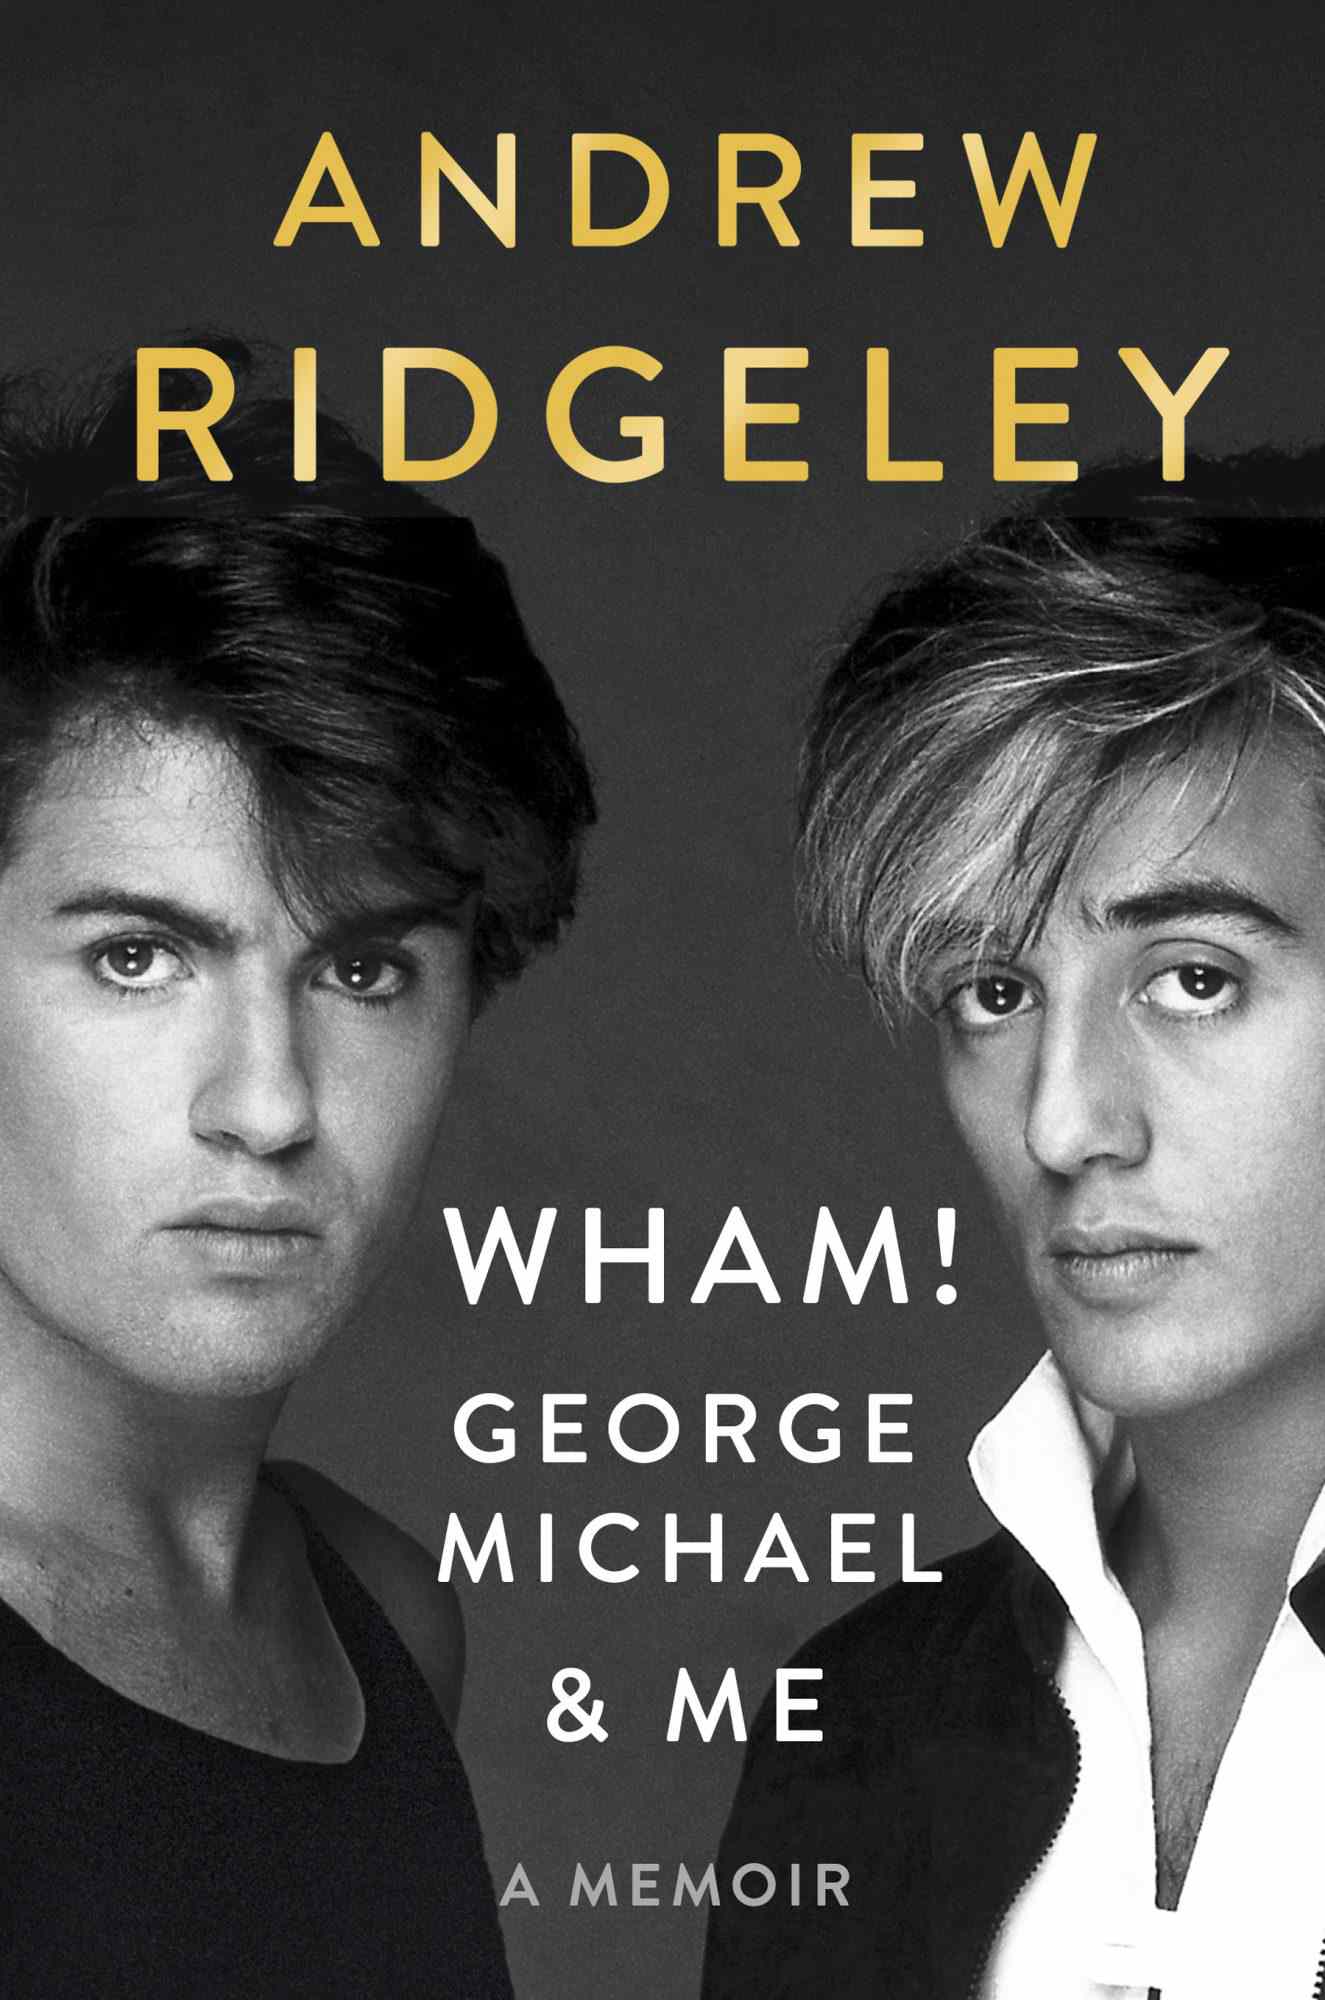 Wham!, George Michael, and Me, by Andrew Ridgeley